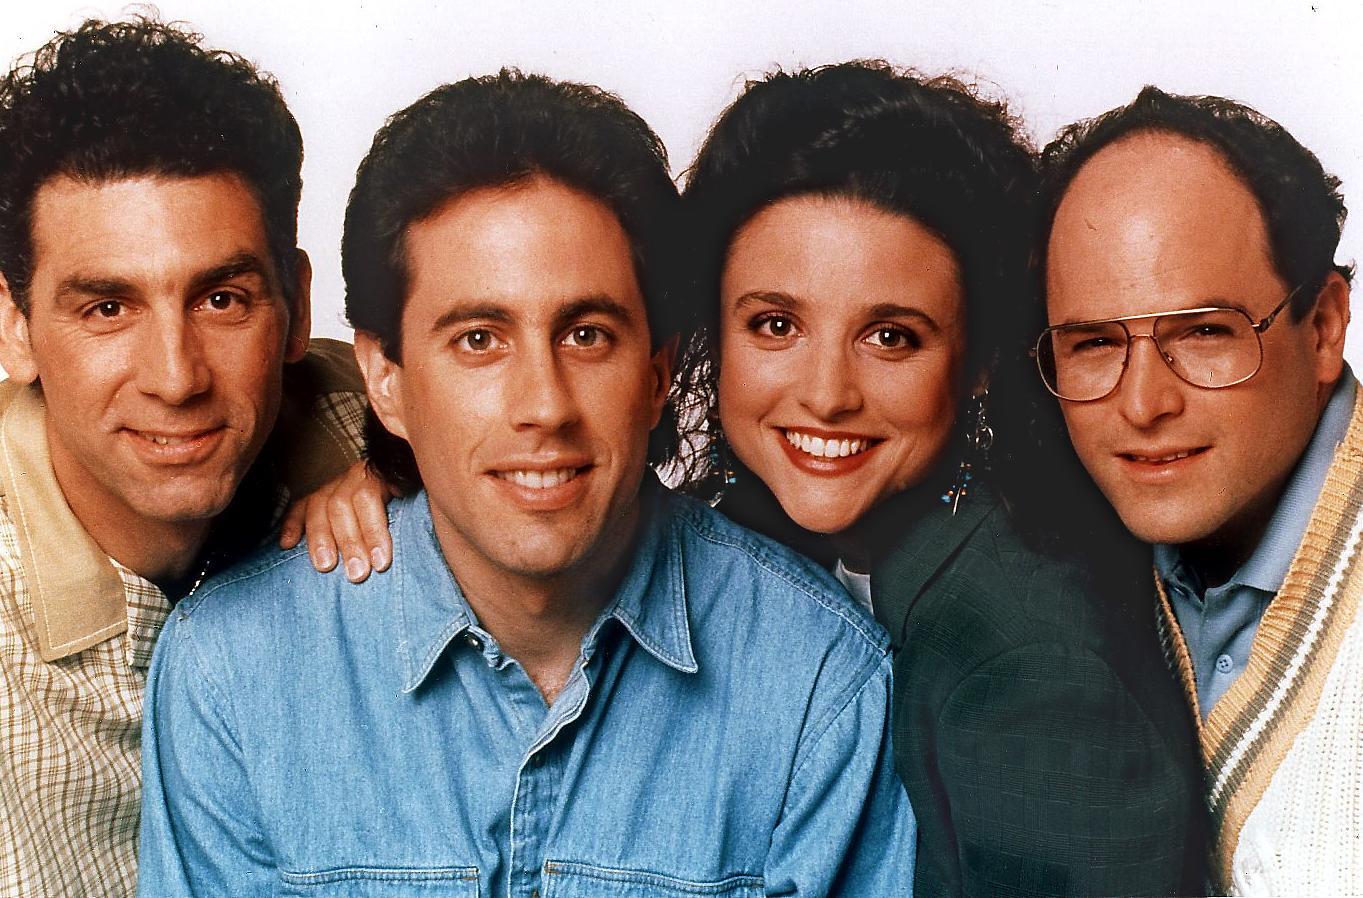 The cast from television's popular "Seinfeld" comedy show are pictured in this undated file photo. NBC will broadcast the final episode of "Seinfeld" 14 May after nine seasons. From left are: Michael Richards, Jerry Seinfeld, Julia Louis-Dreyfus and Jason Alexander. AFP PHOTO AFP FILES/HMBFILES / AFP [AFP - HMB FILES]